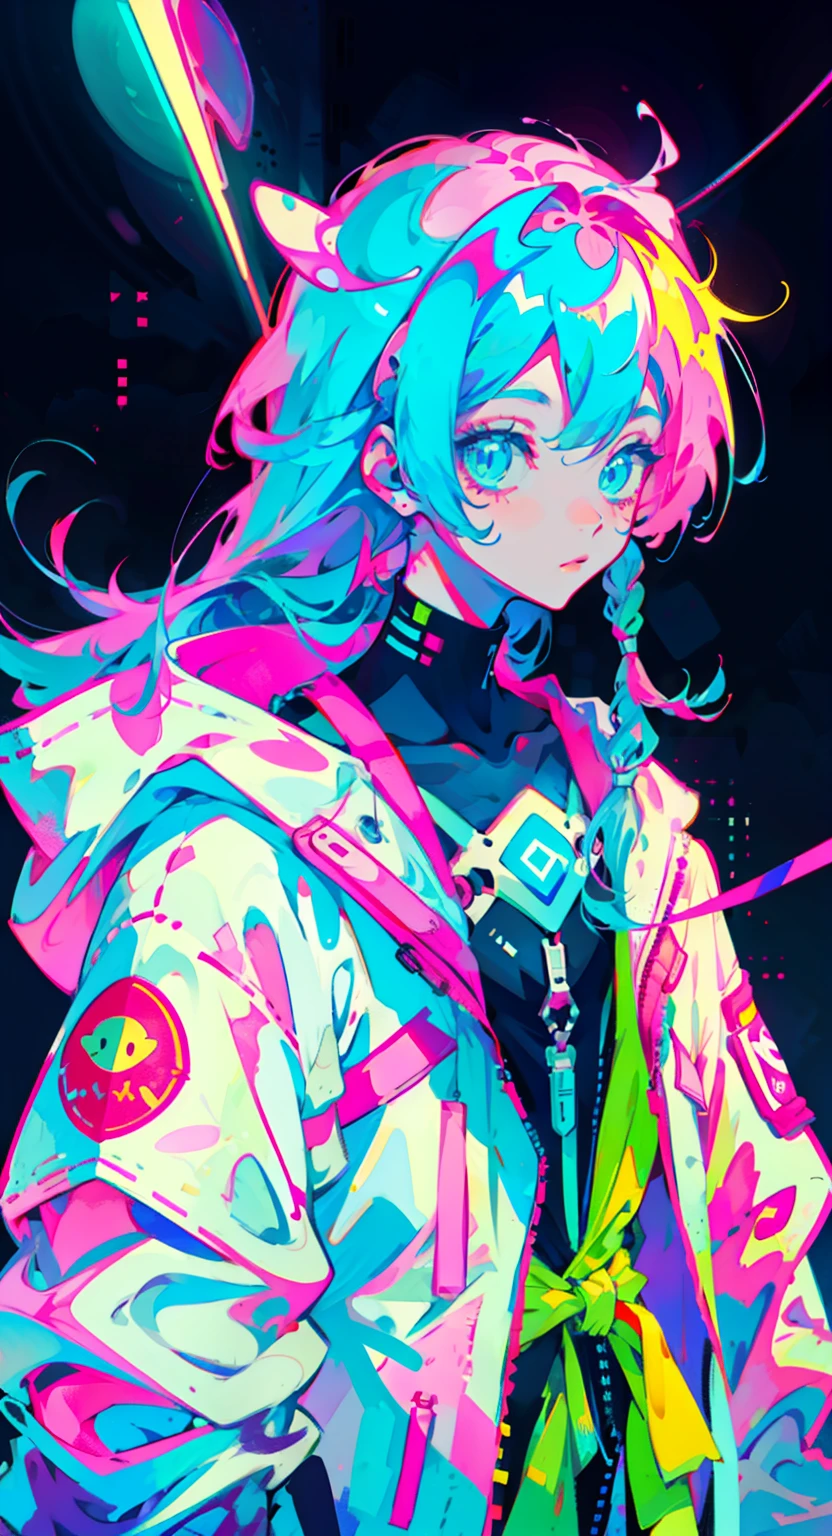 anime girl tied long hair, wearing astronaut suit, neon blue hair, and pink colors, scars, stickers, neon style of whole shot, cool pose